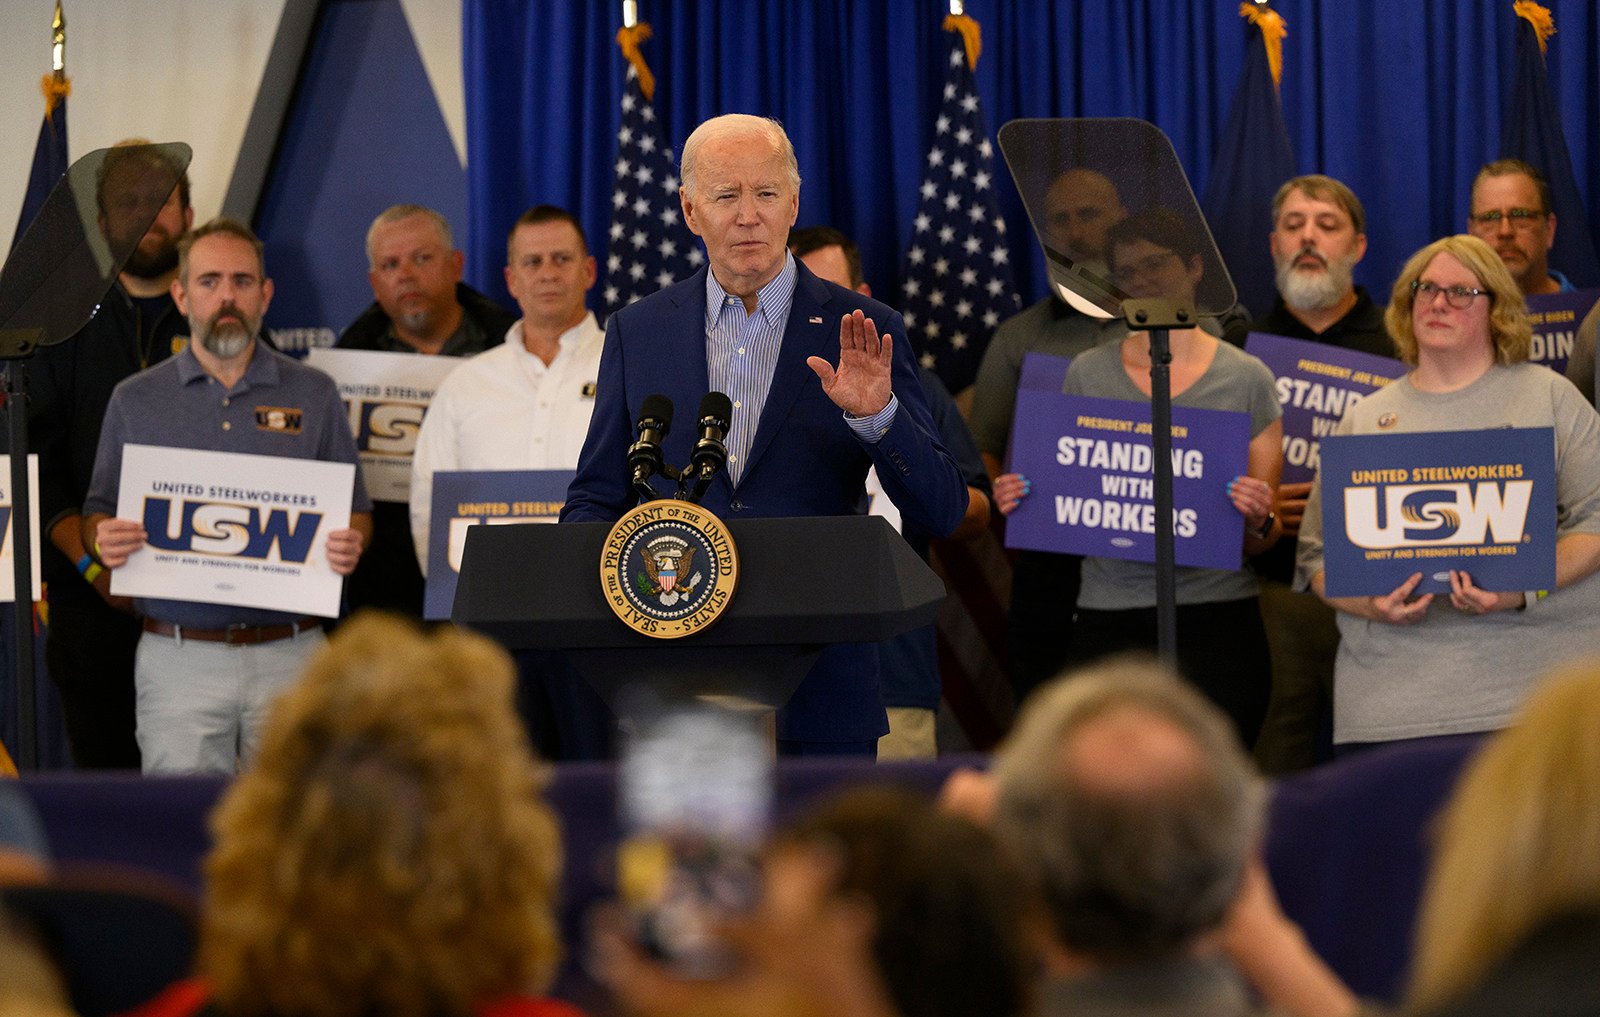 President Joe Biden, who has called for tripling the tariffs on Chinese steel,  speaks at the United Steelworkers Headquarters in Pittsburgh on April 17. Photo: TNS 